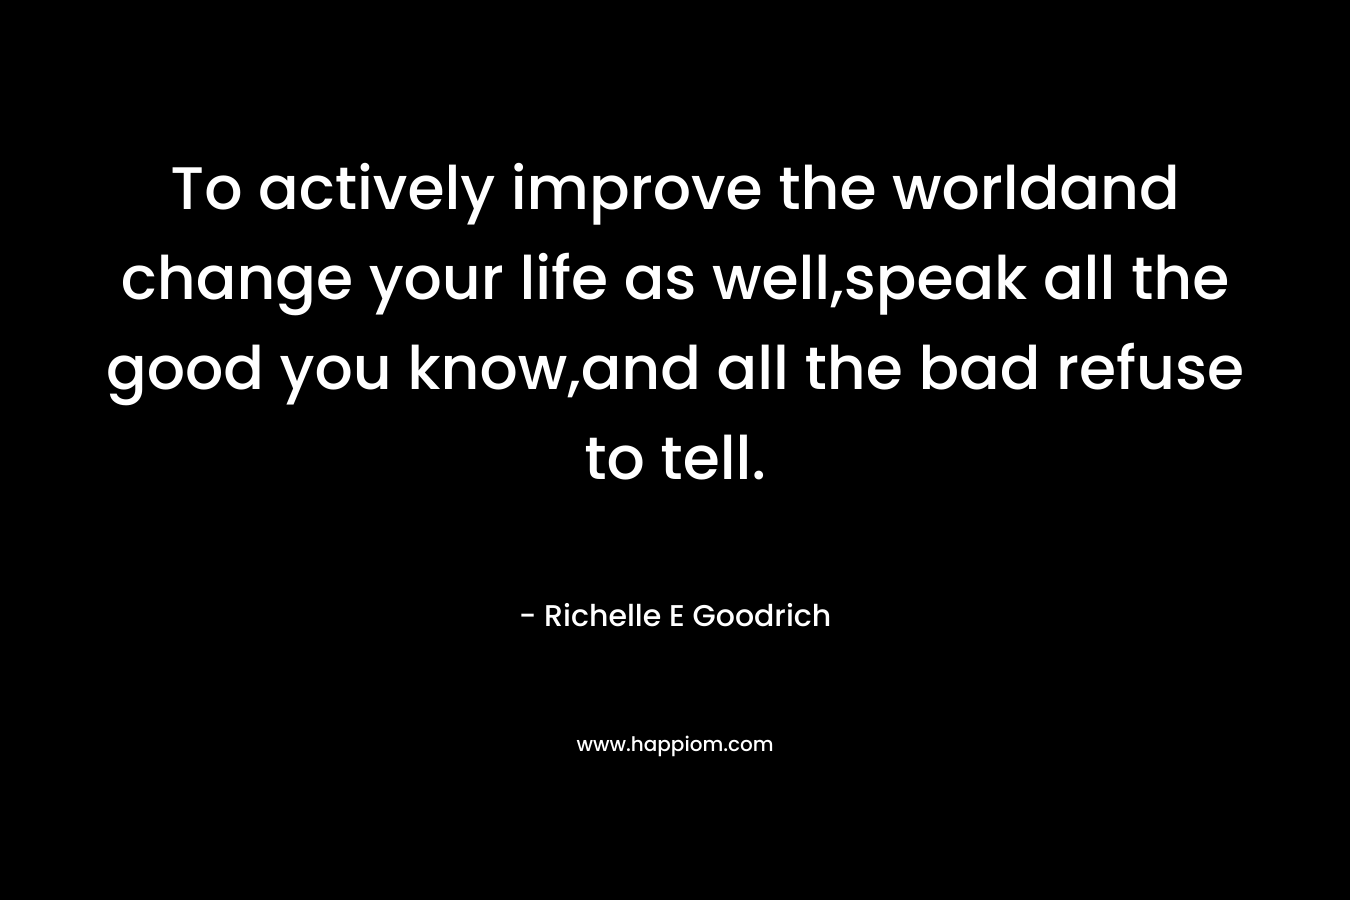 To actively improve the worldand change your life as well,speak all the good you know,and all the bad refuse to tell. – Richelle E Goodrich